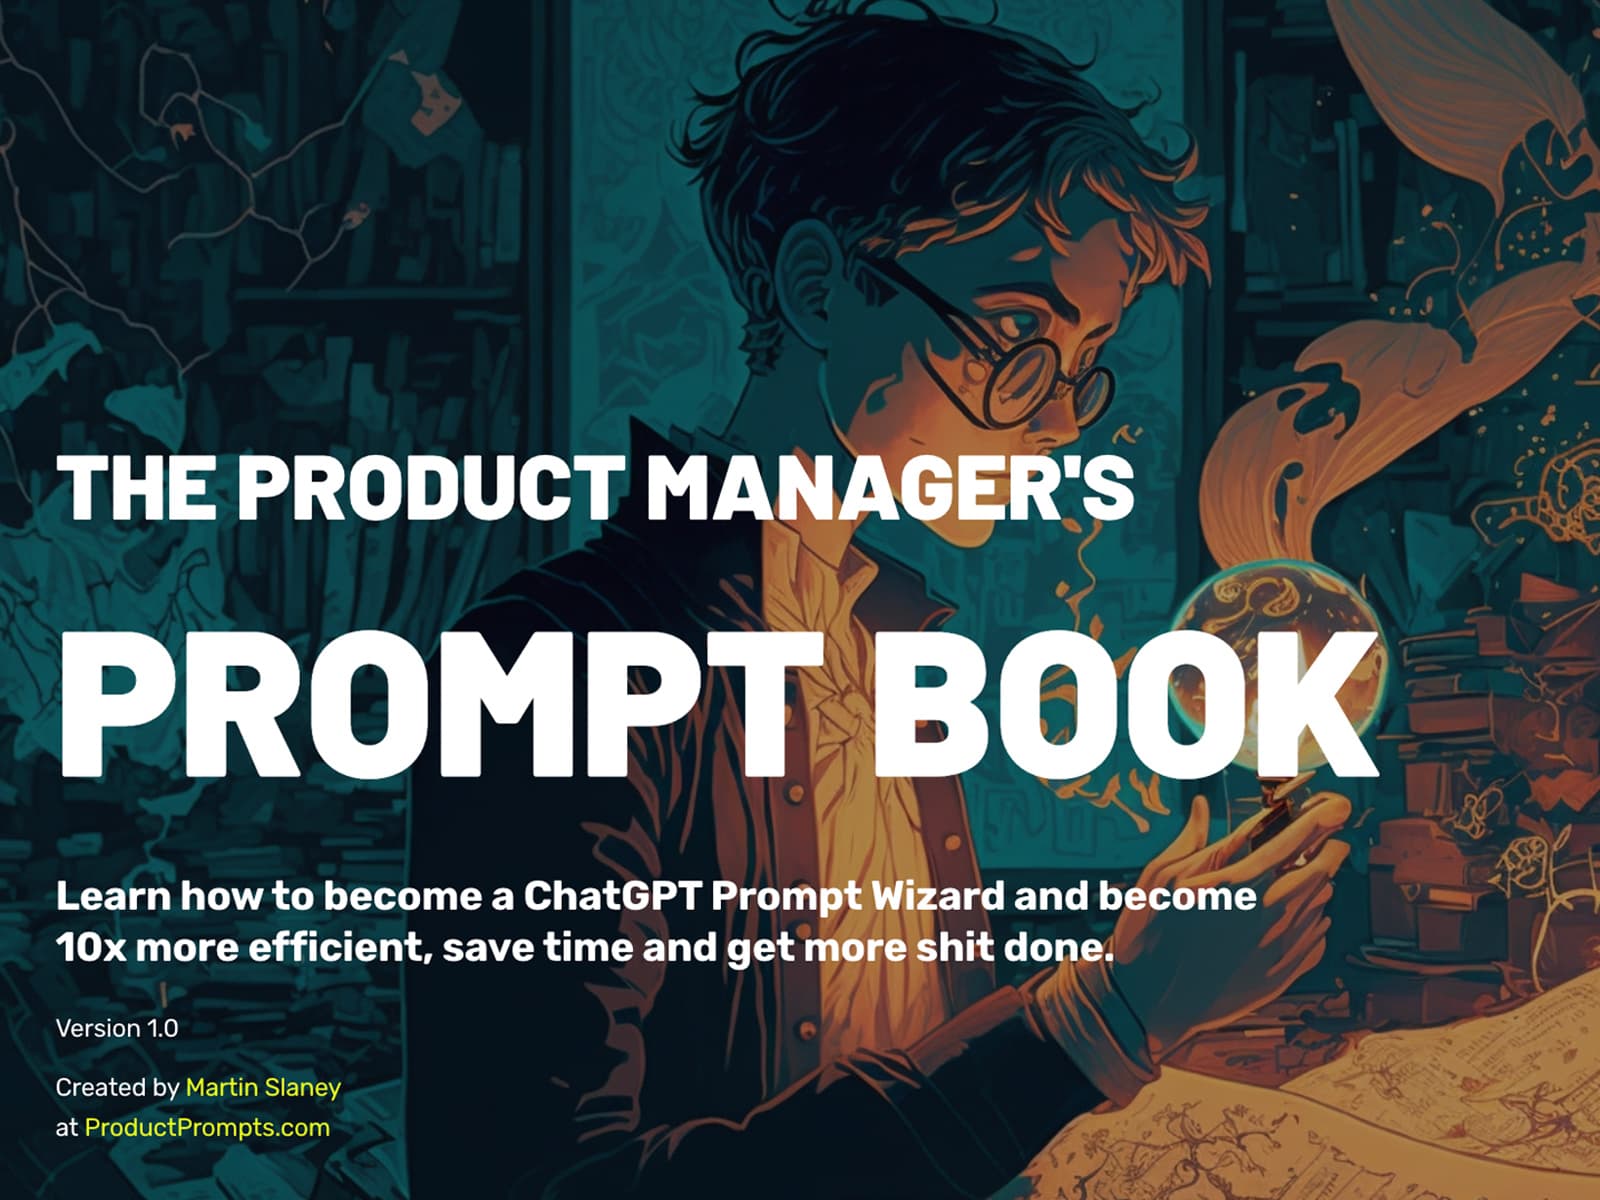 Product Prompts by Martin Slaney